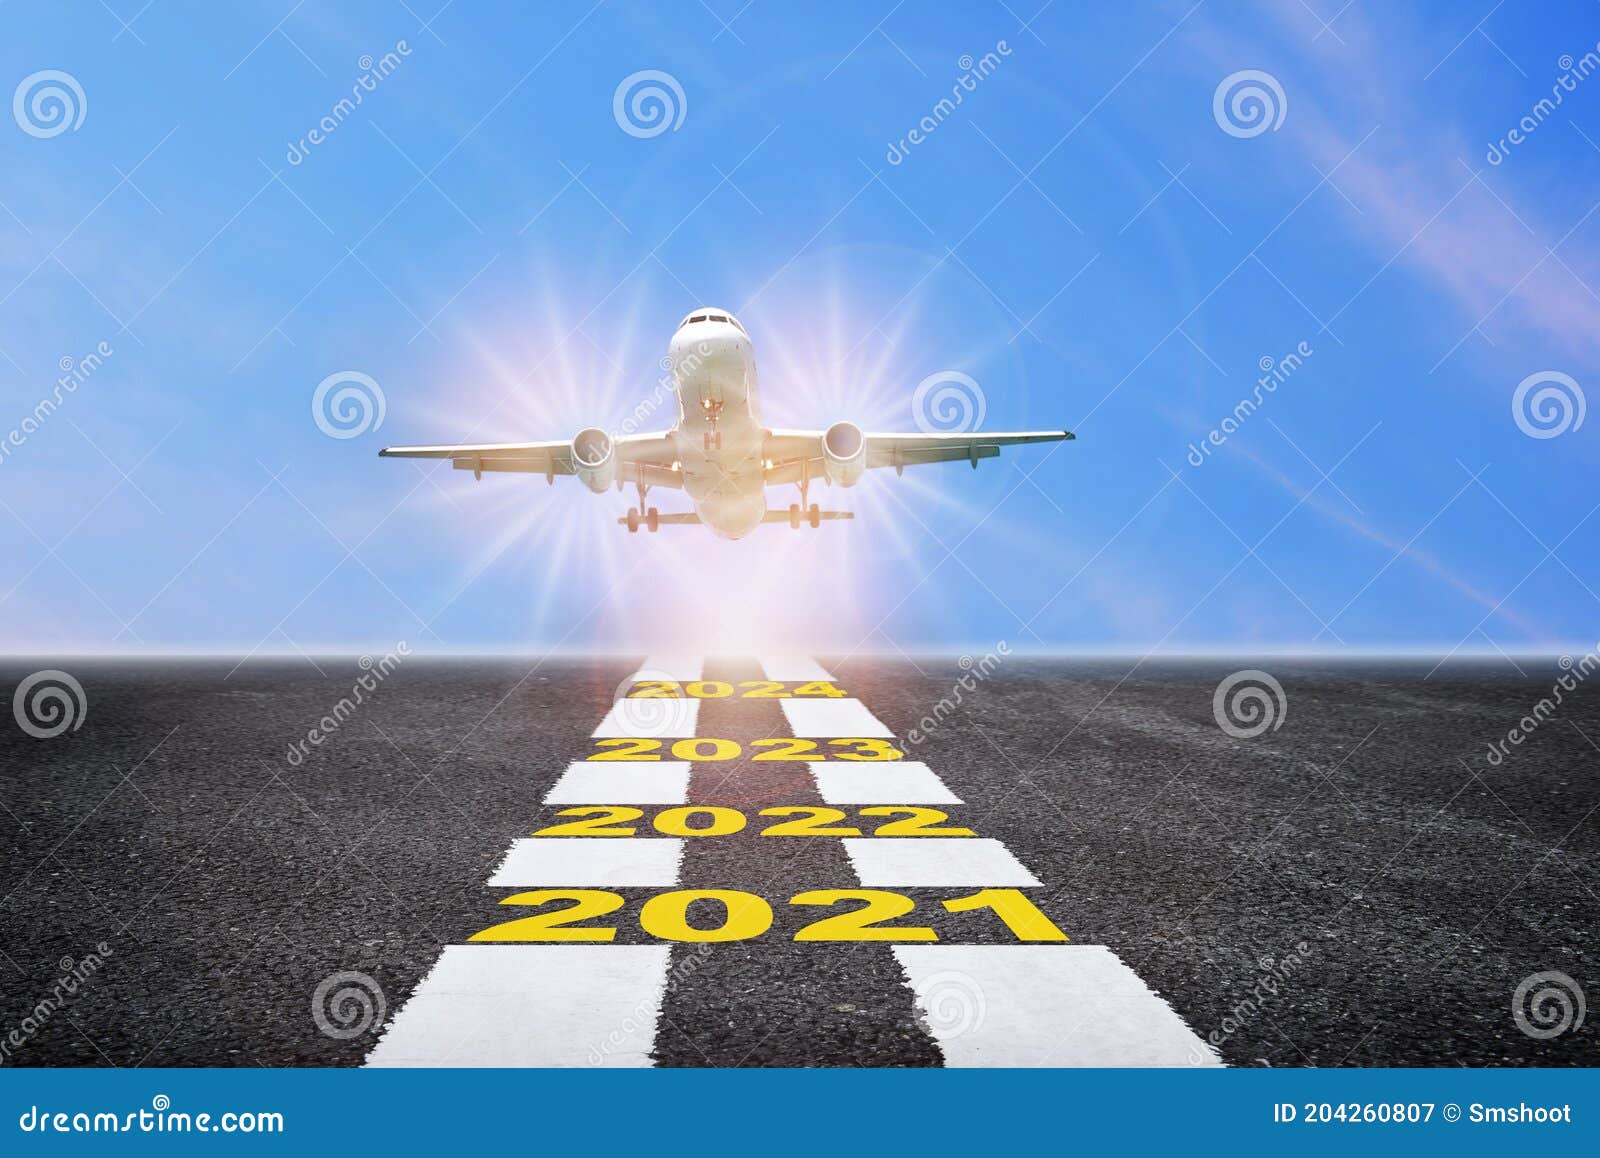 Commercial Plane Ready for Landing or Taking Off with Year 2021 To 2024